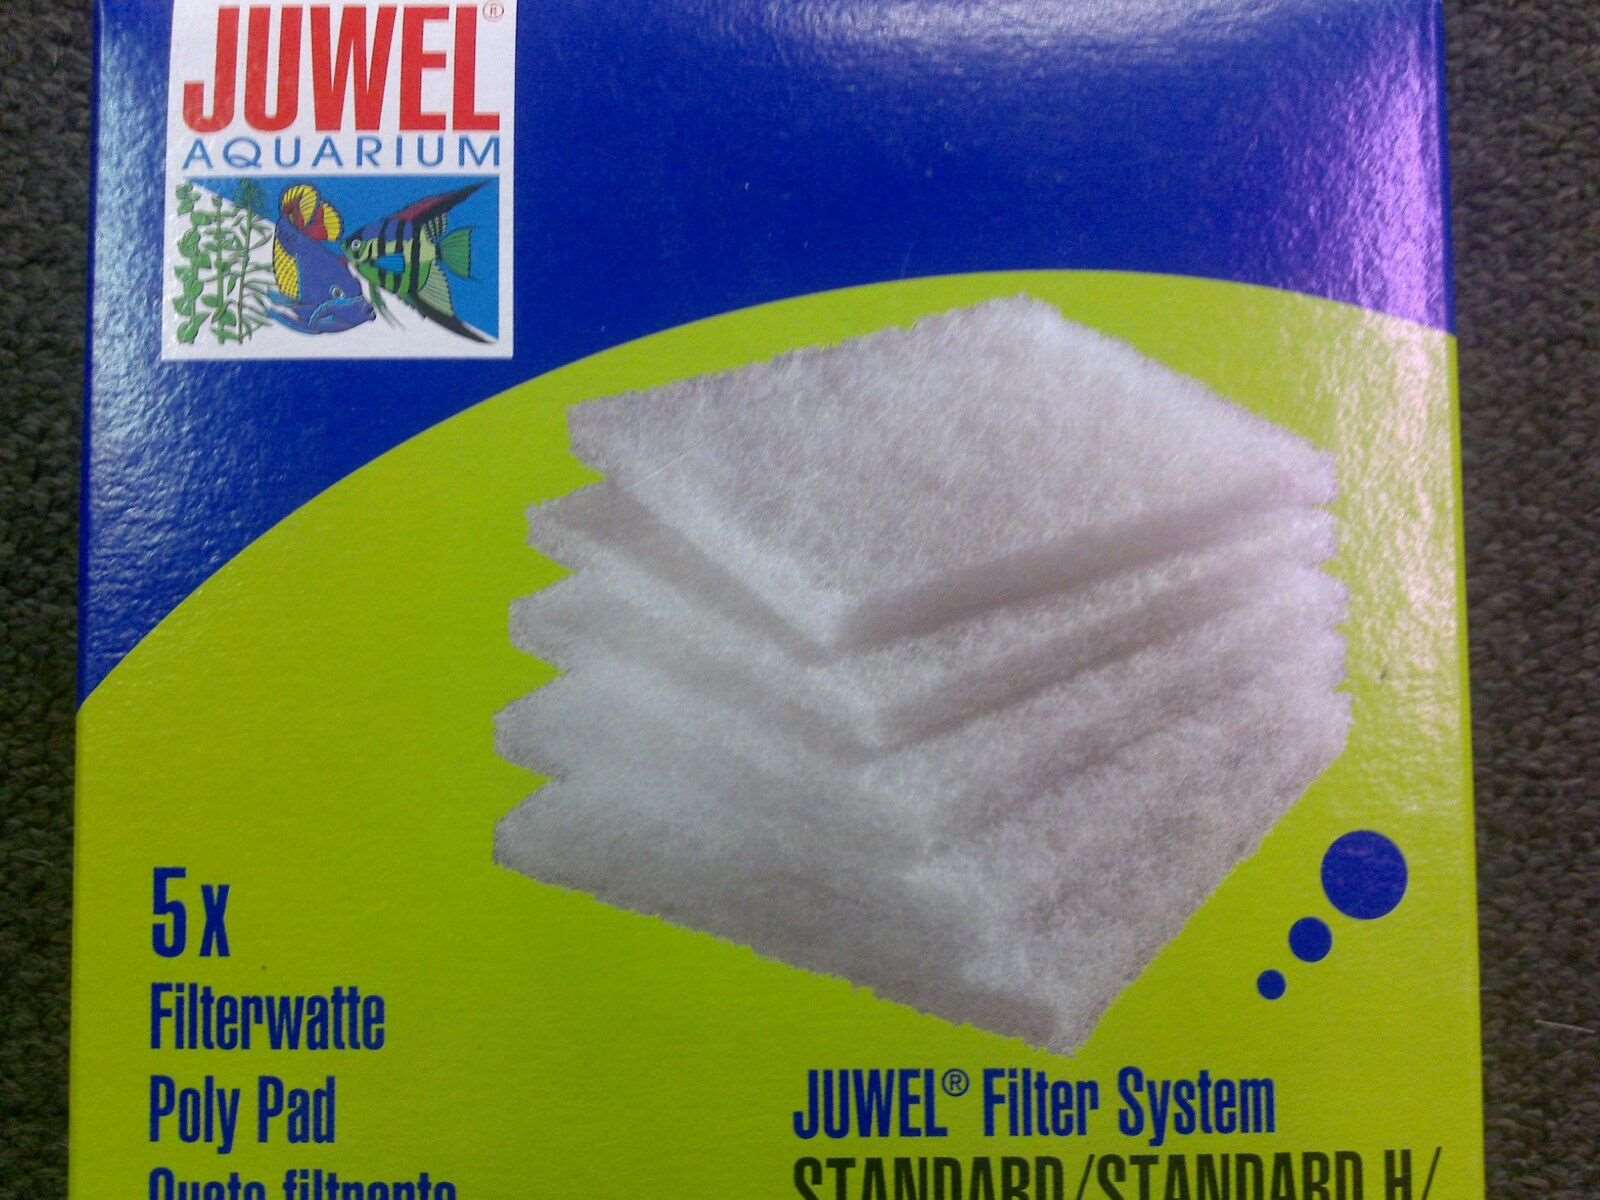 Juwel Standard 6.0 white poly pads, 1 box with 5 x poly pads